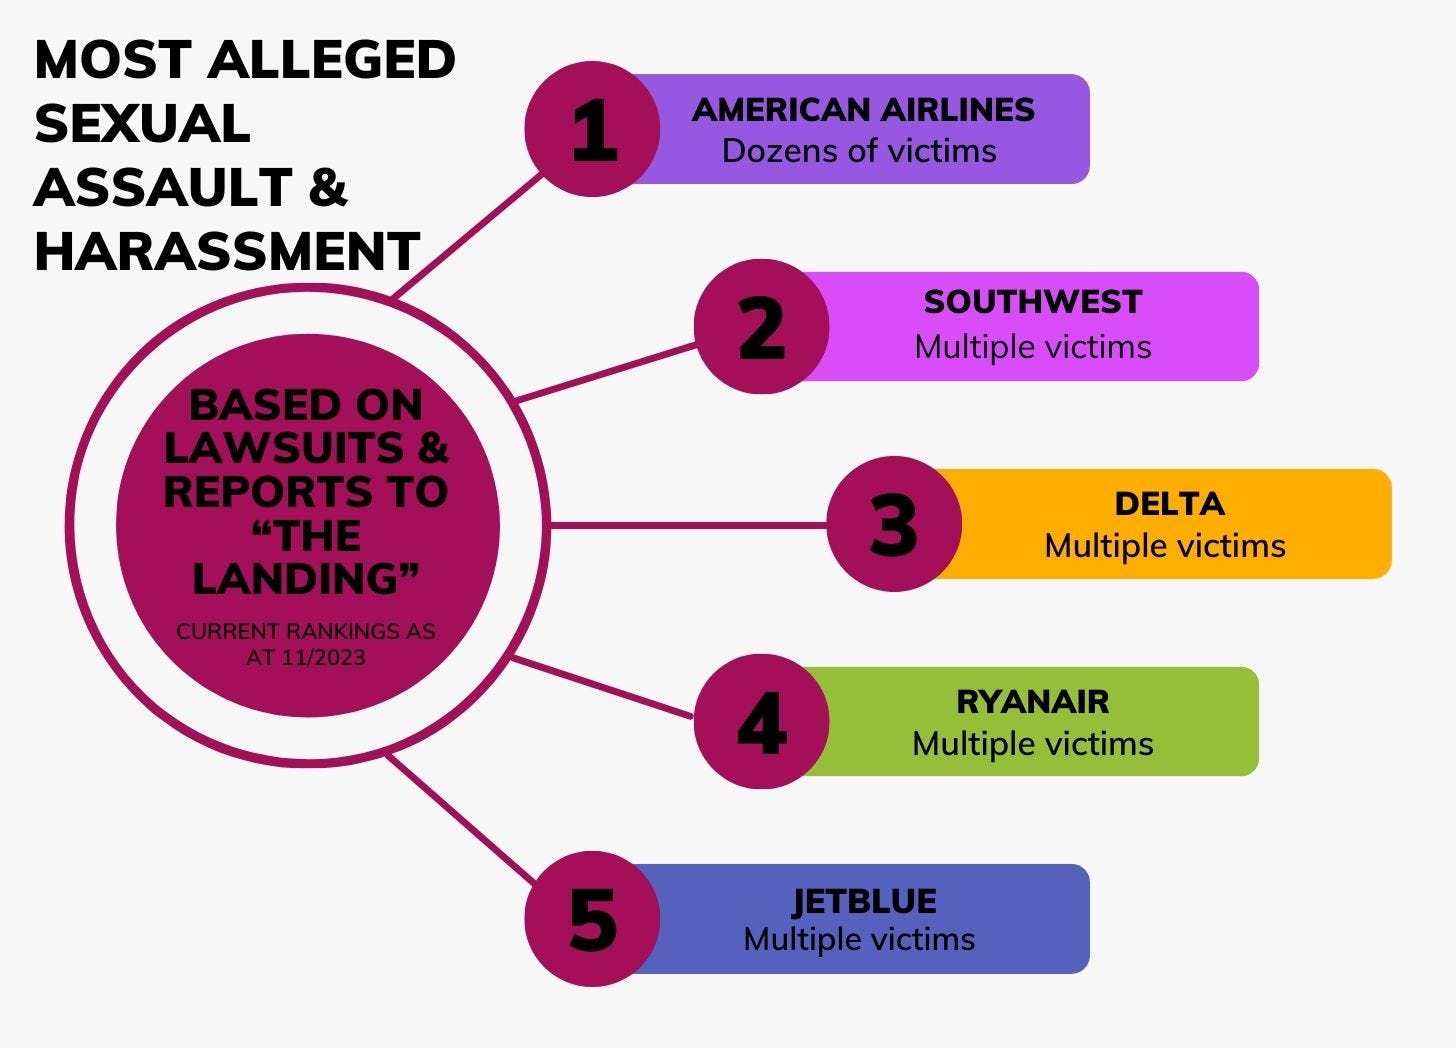 A list of 5 airlines with many sexual assault allegations at their staff.